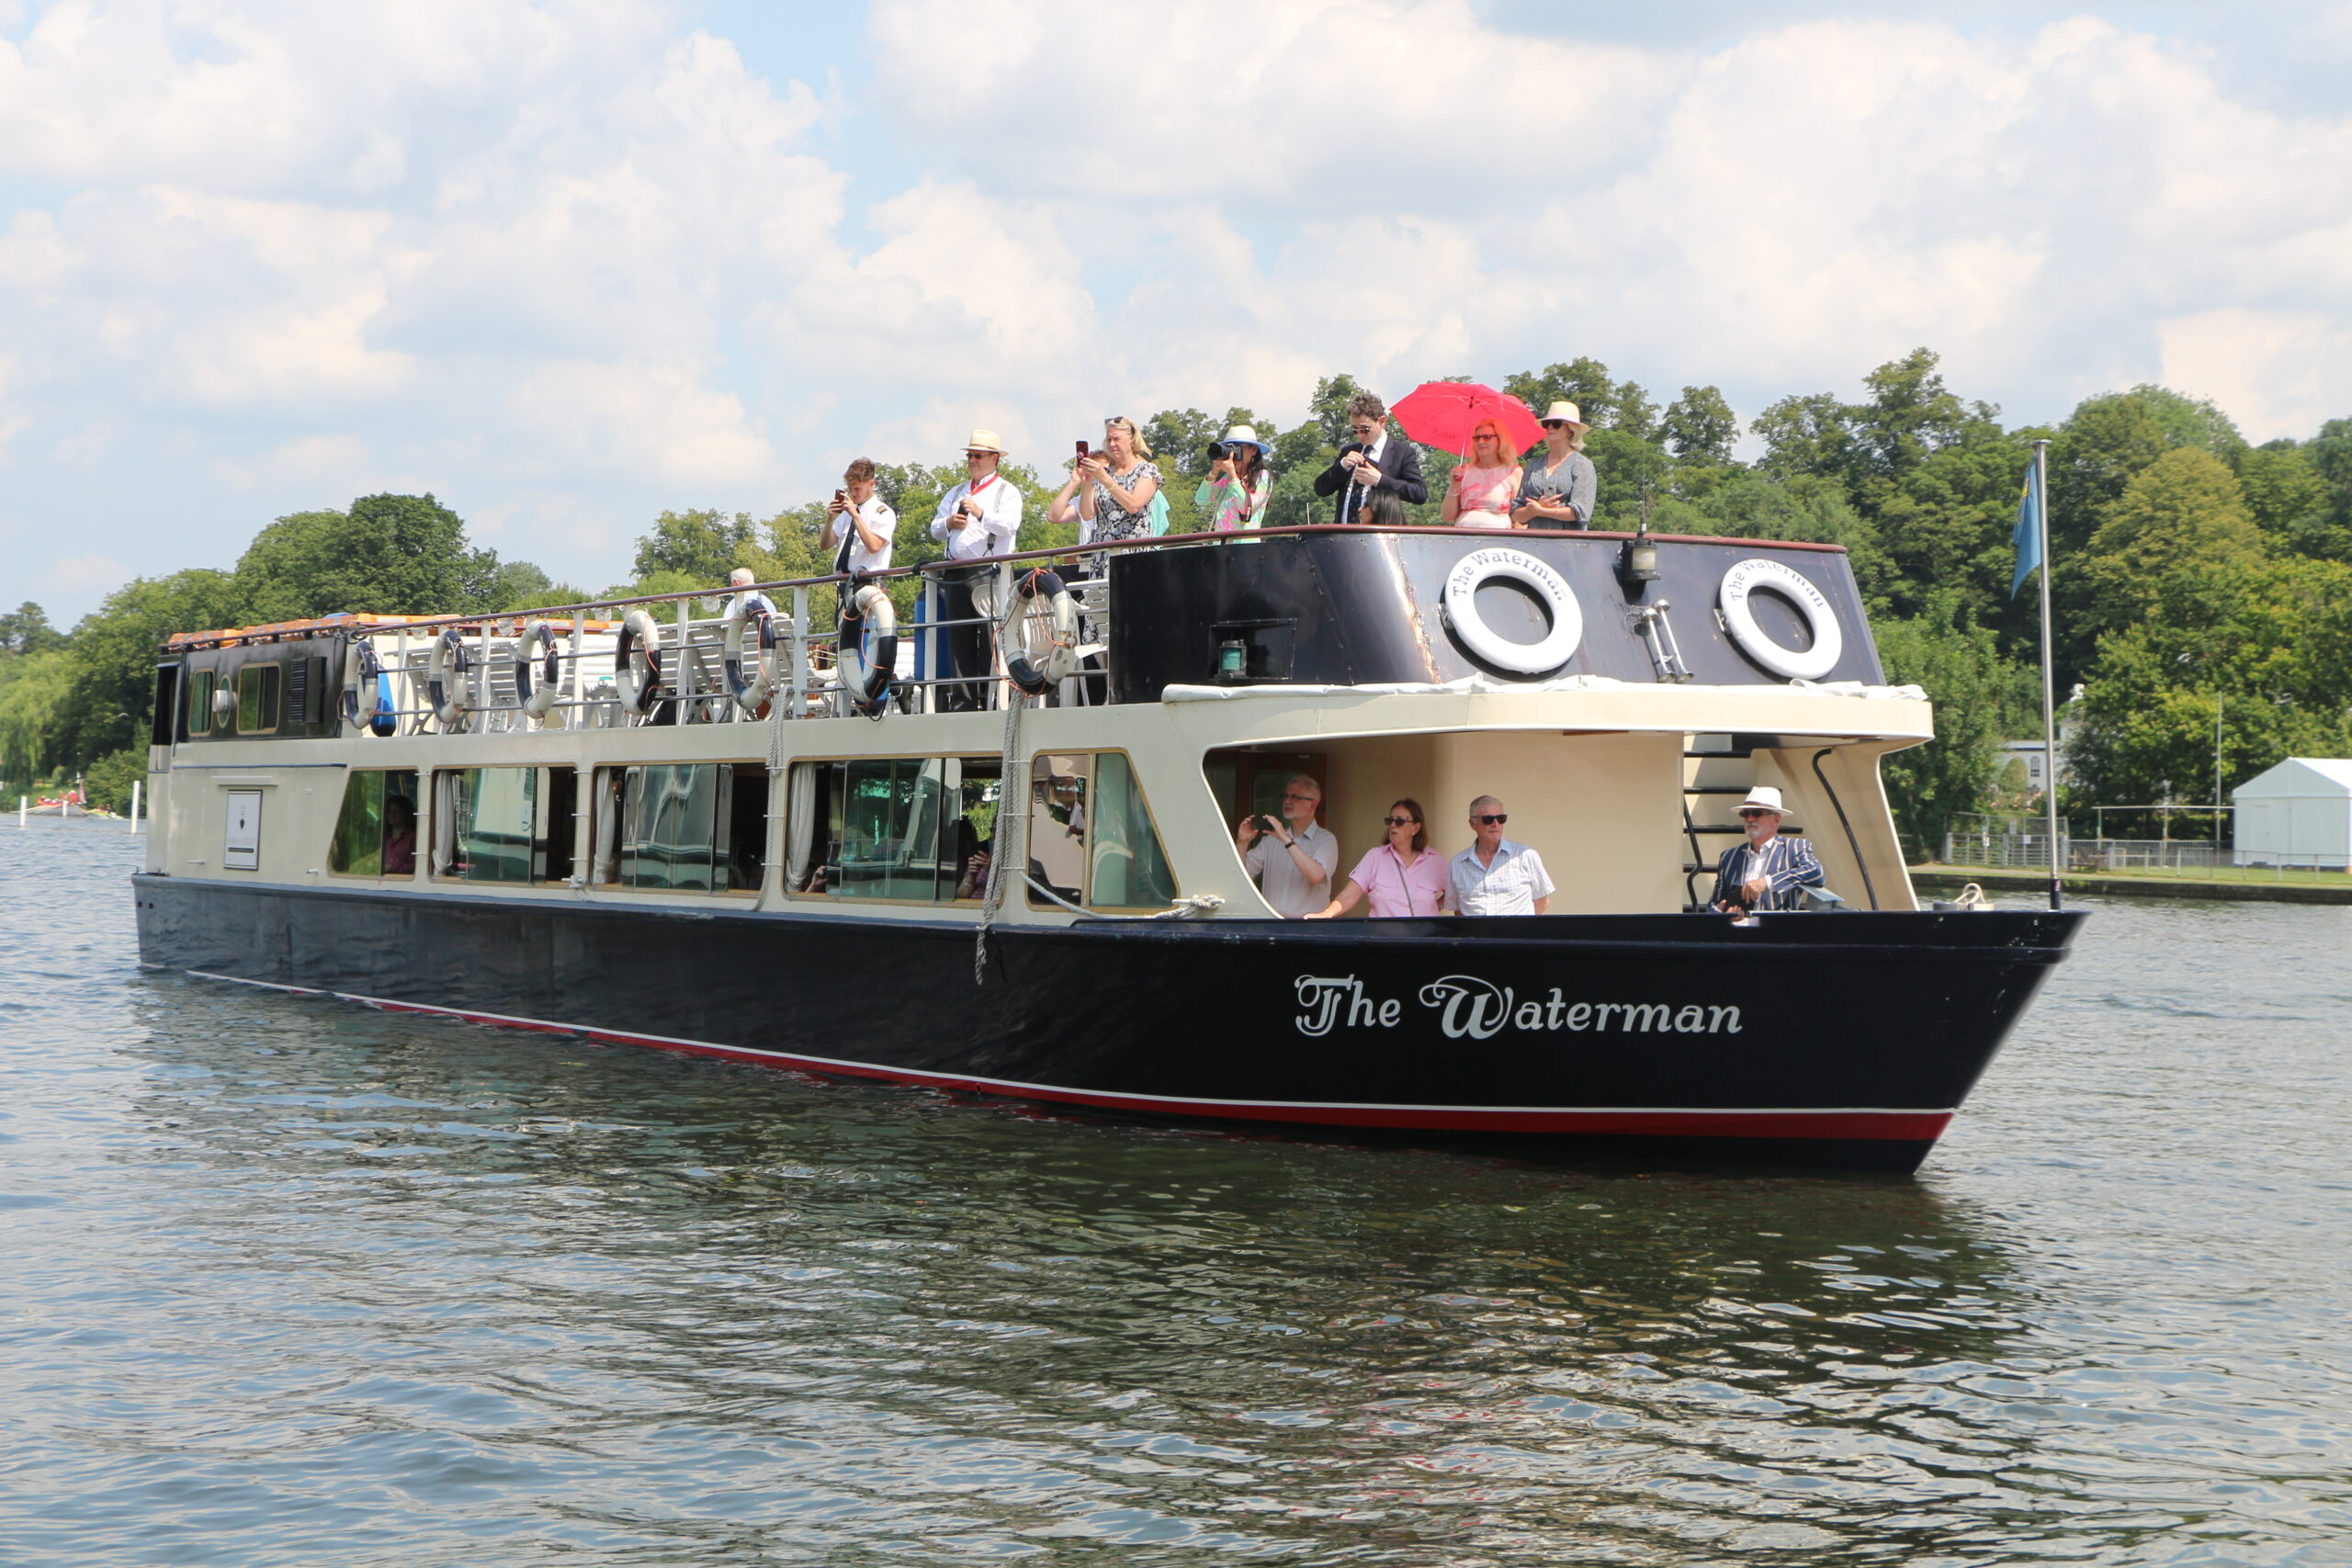 The Waterman on the river thames. Passengers both inside and outside the boat.